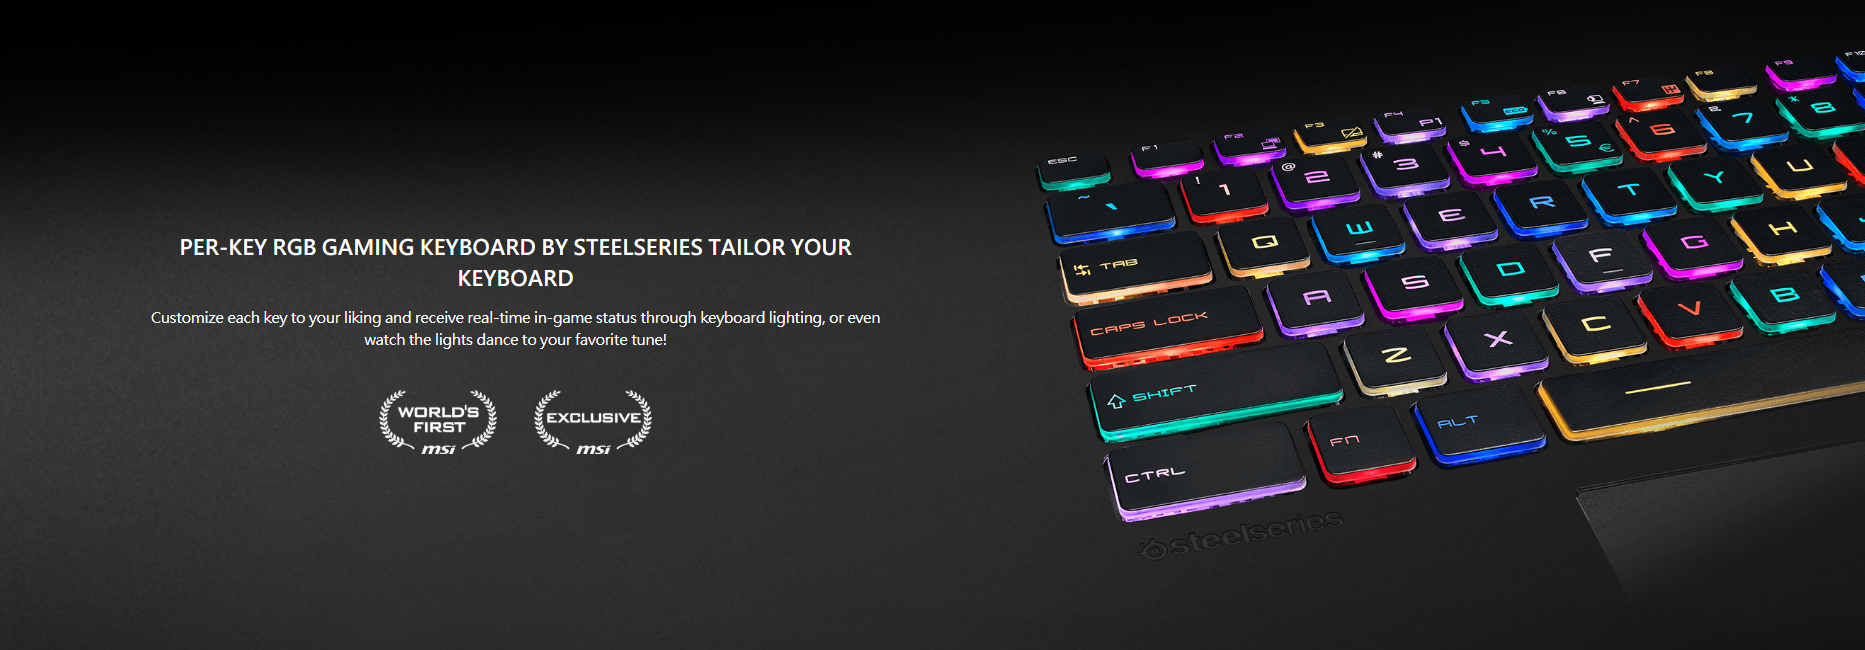 Customize each key to your liking and receive real-time in-game status through keyboard lighting, or even watch the lights dance to your favorite tune!